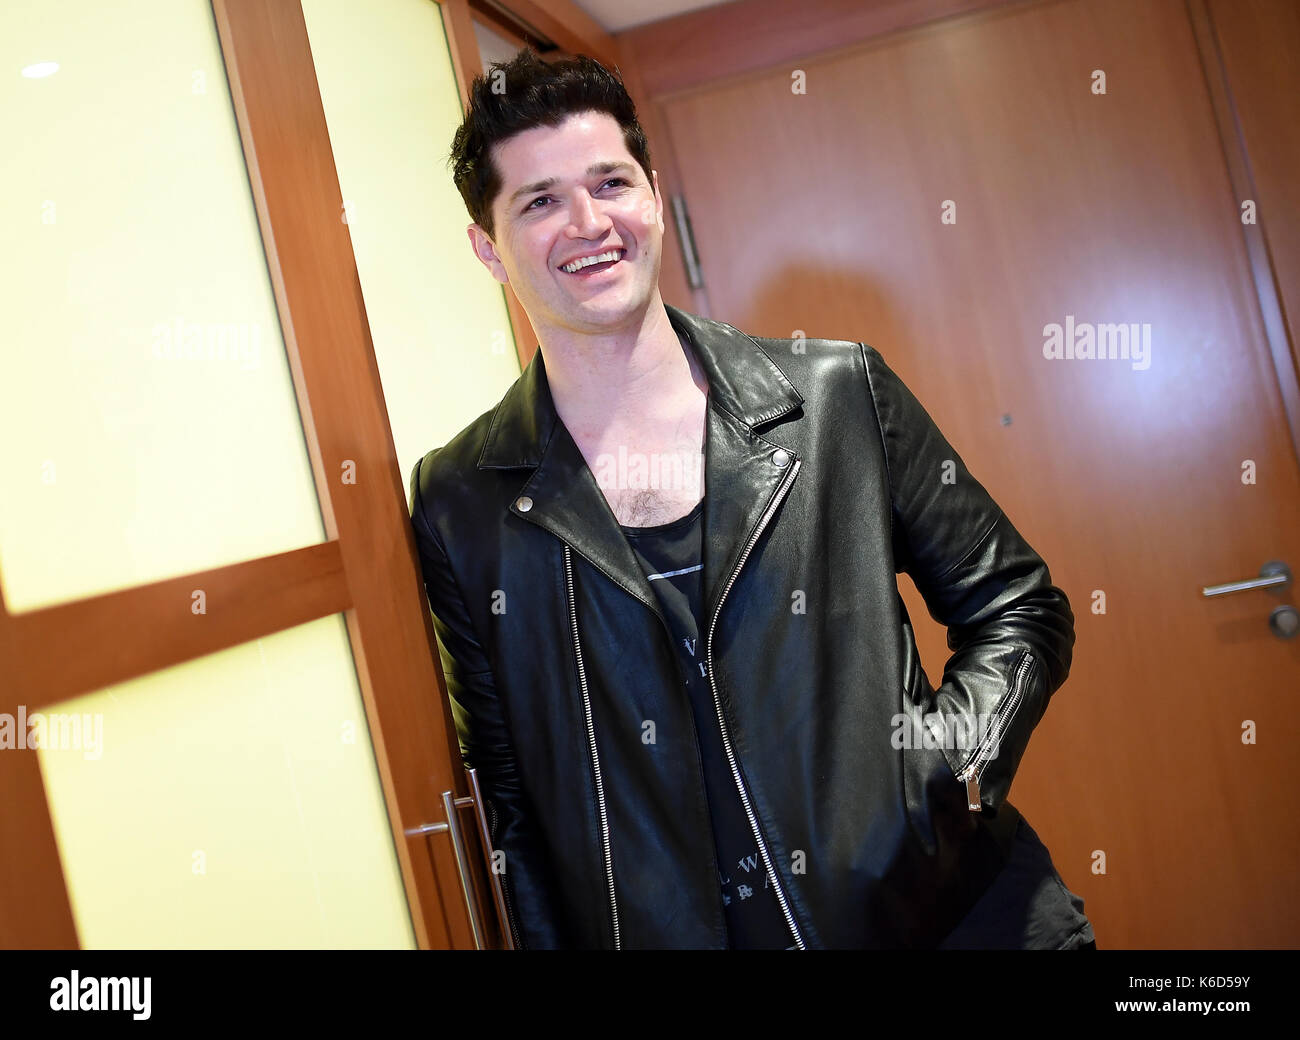 The singer Danny O'Donoghue of the Irish band The Script can be seen in Berlin, Germany, 11 September 2017. Photo: Britta Pedersen/dpa-Zentralbild/ZB Stock Photo